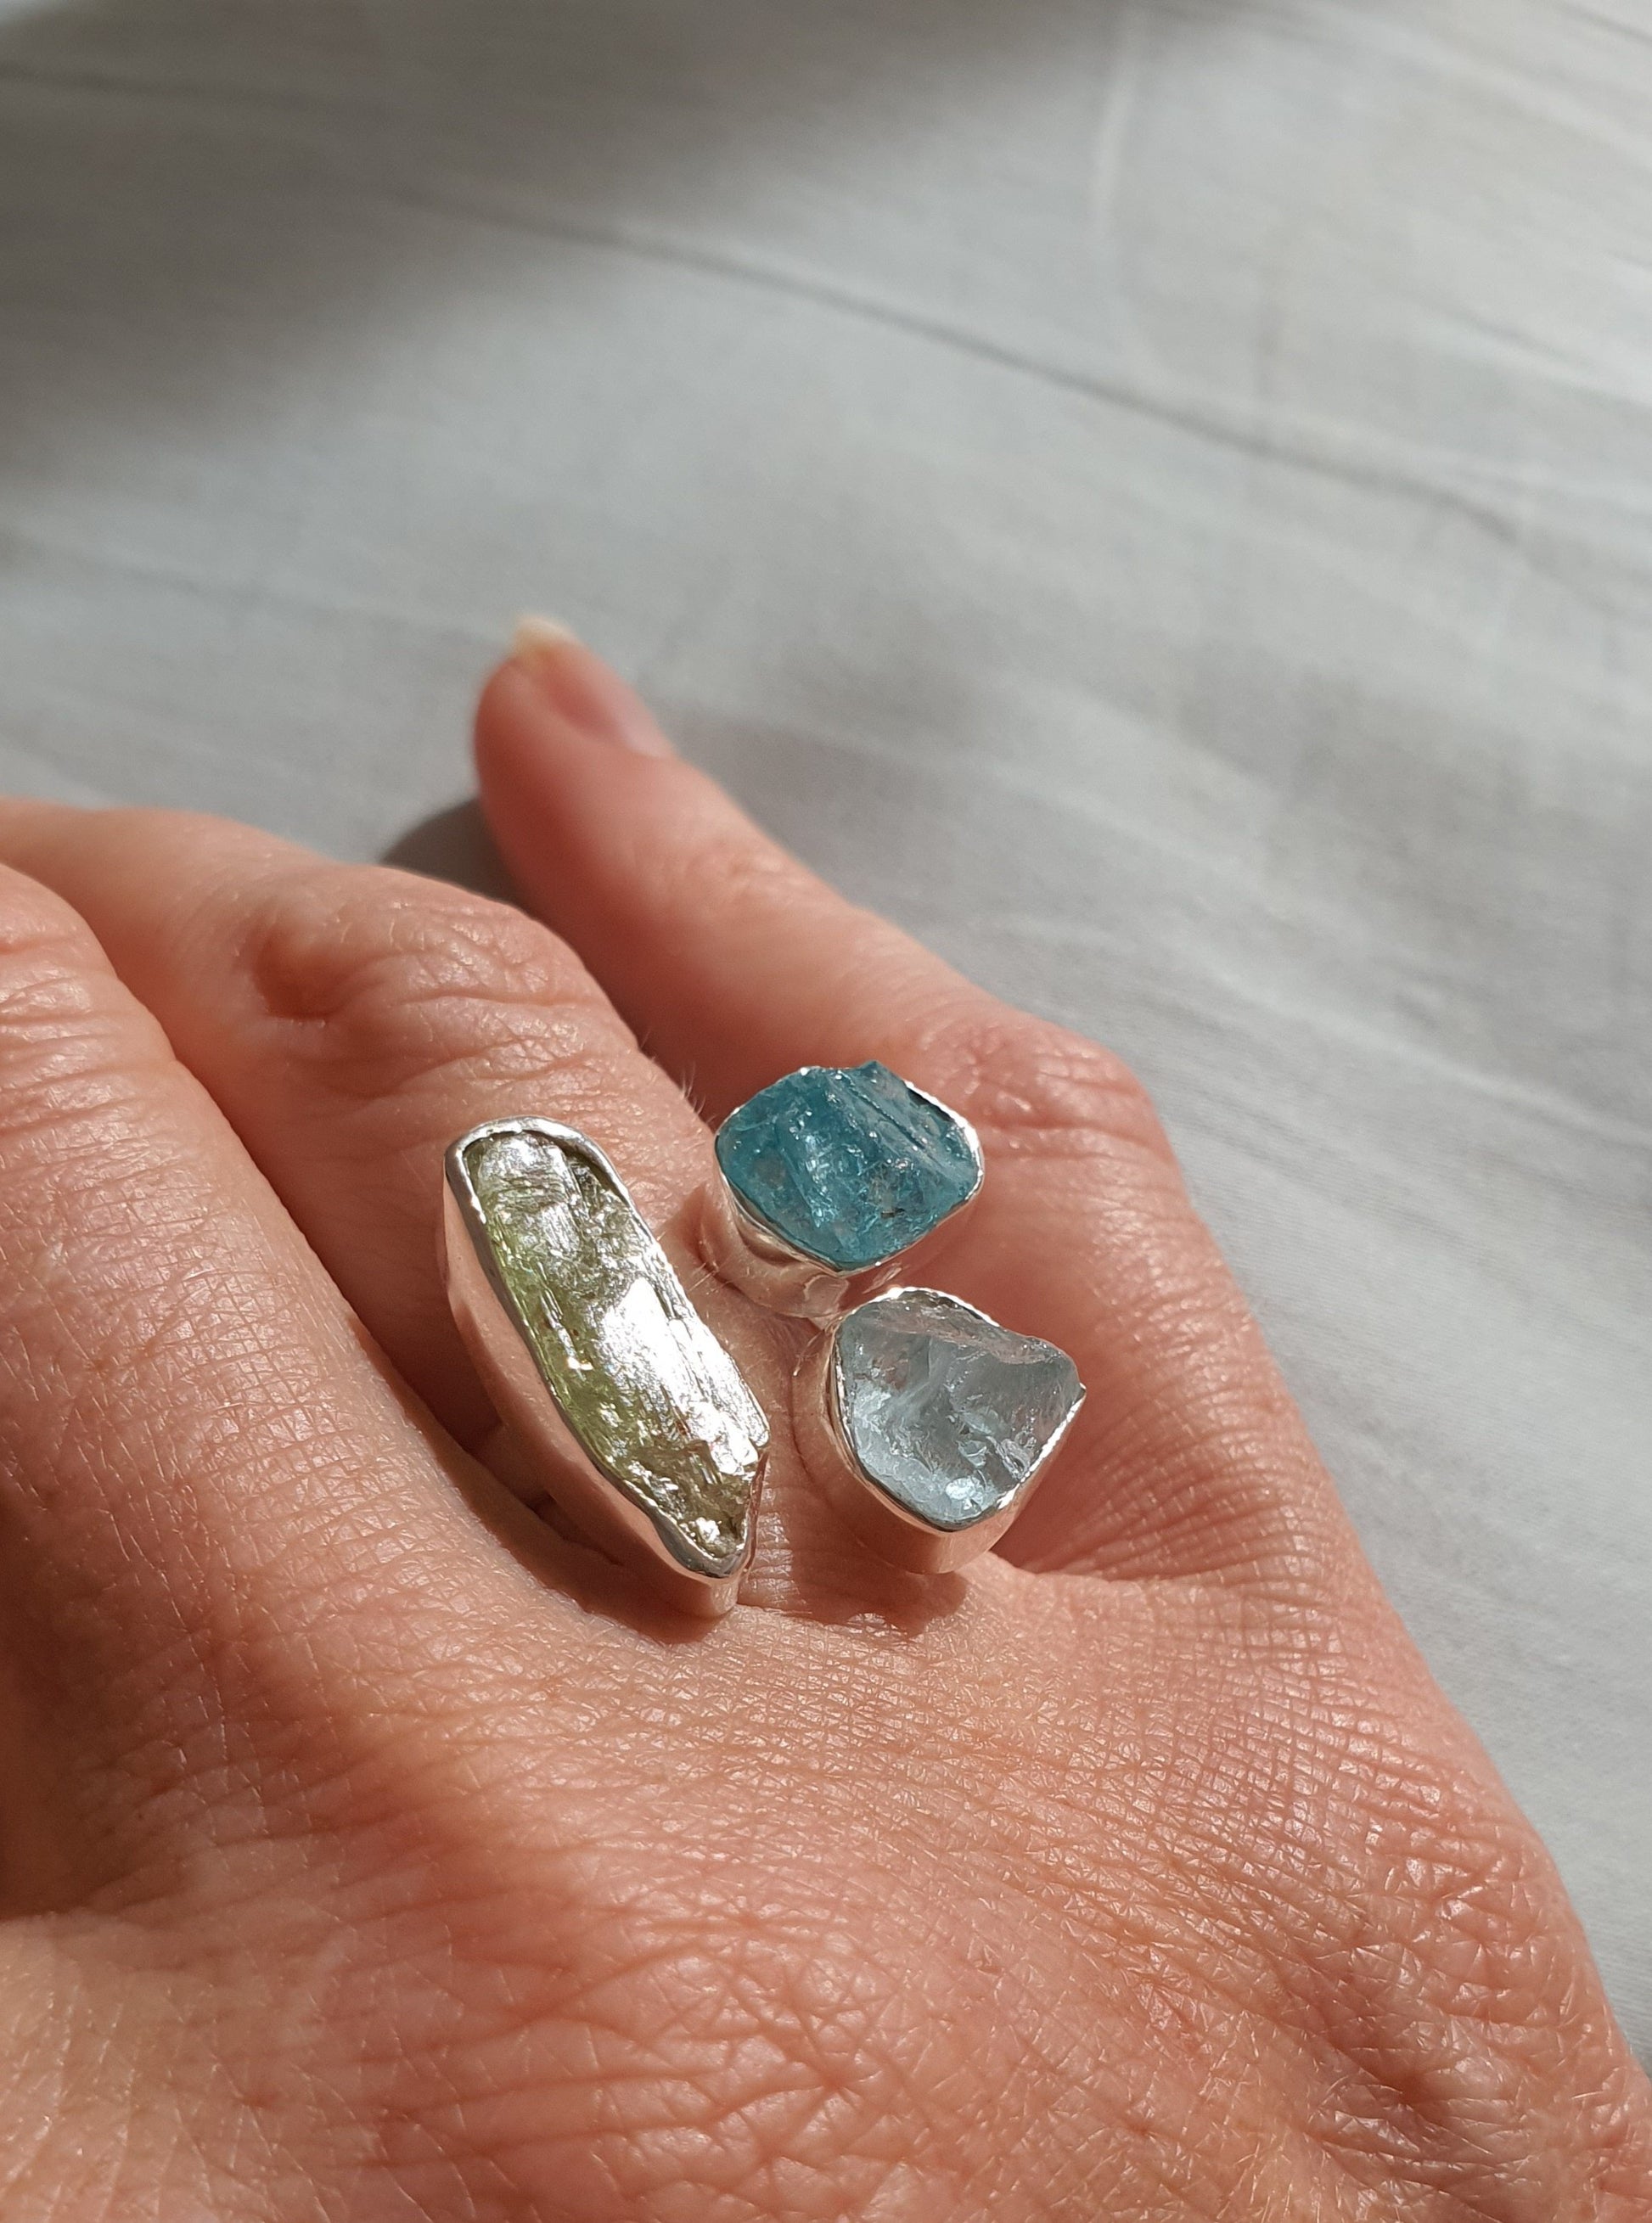 A silver ring with raw cut crystals in blues and greens